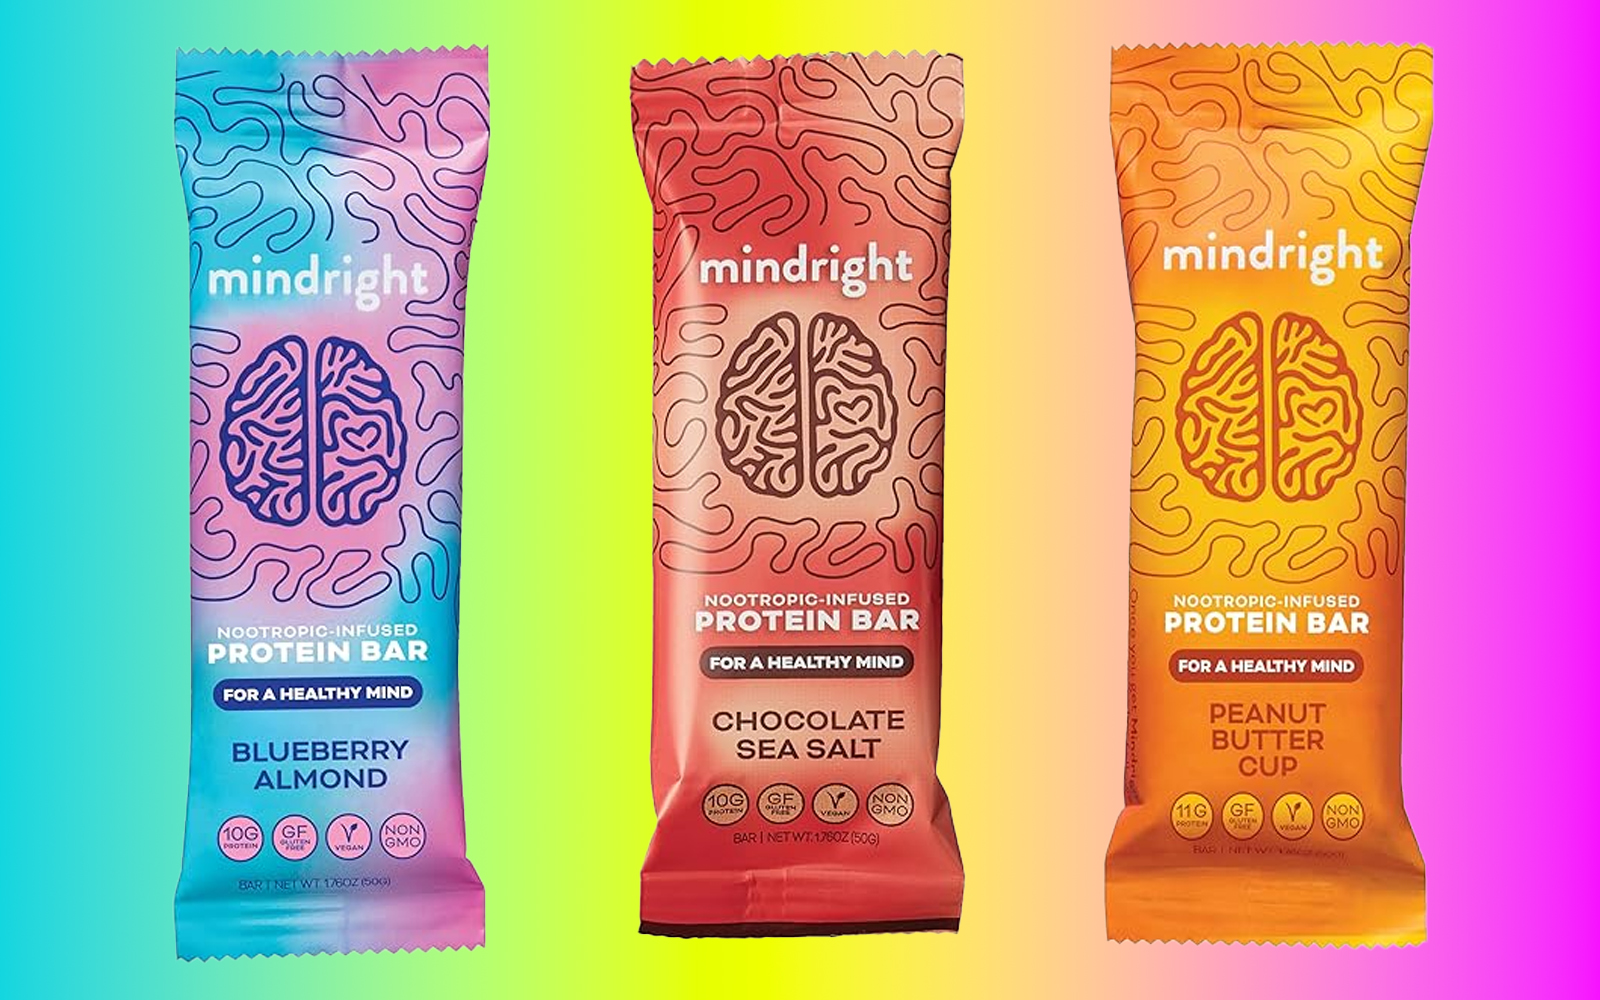 mindright nootropic-infused protein bars